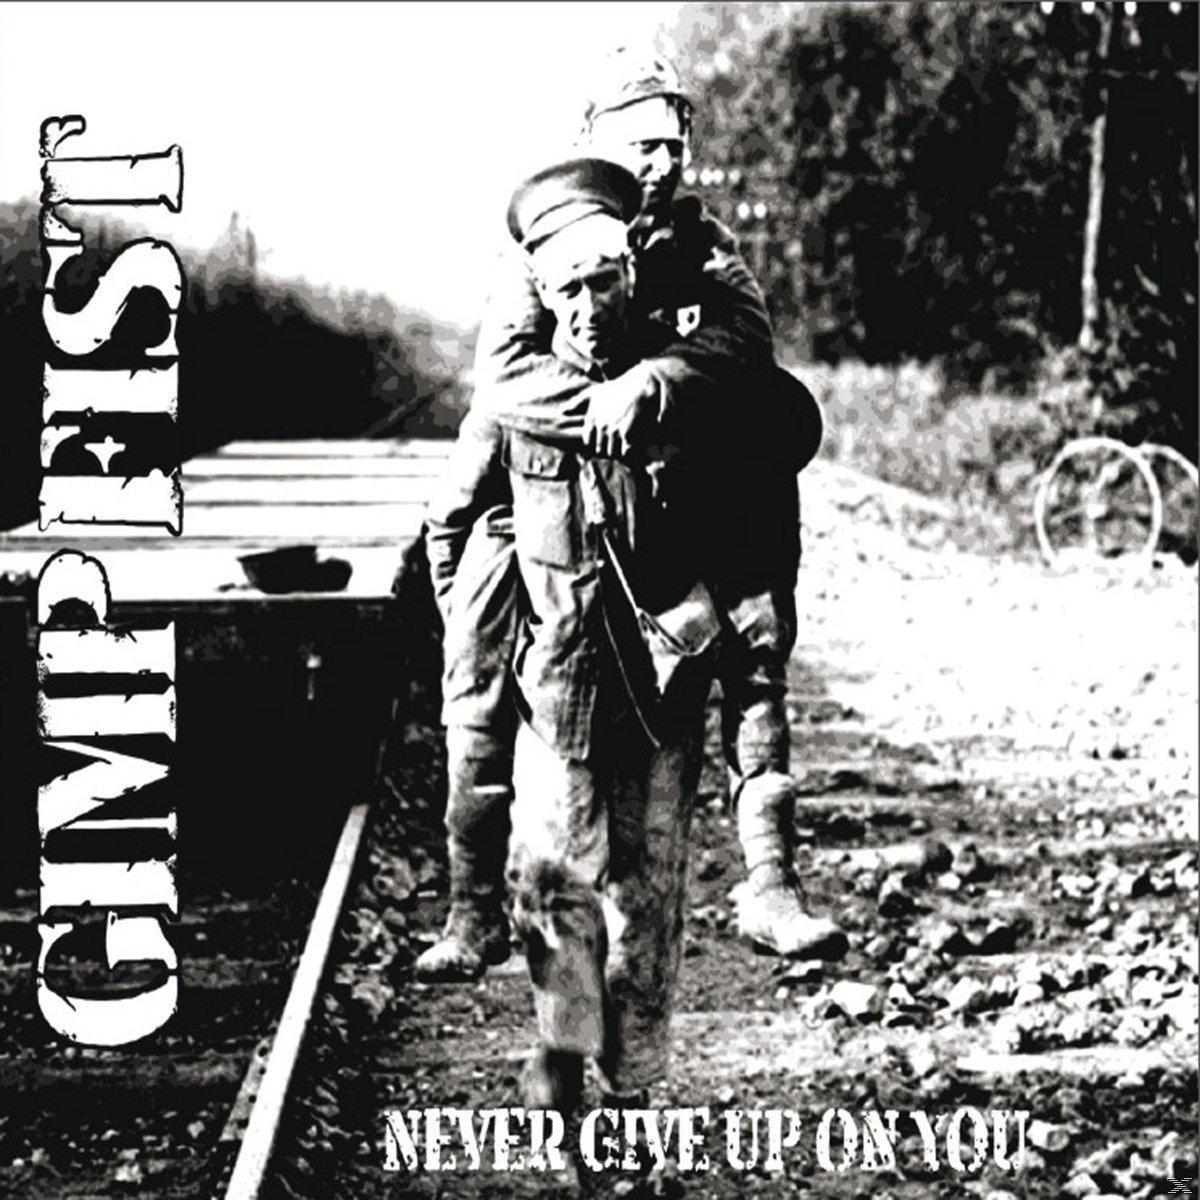 Gimp Fist Up - You Give (CD) - On Never